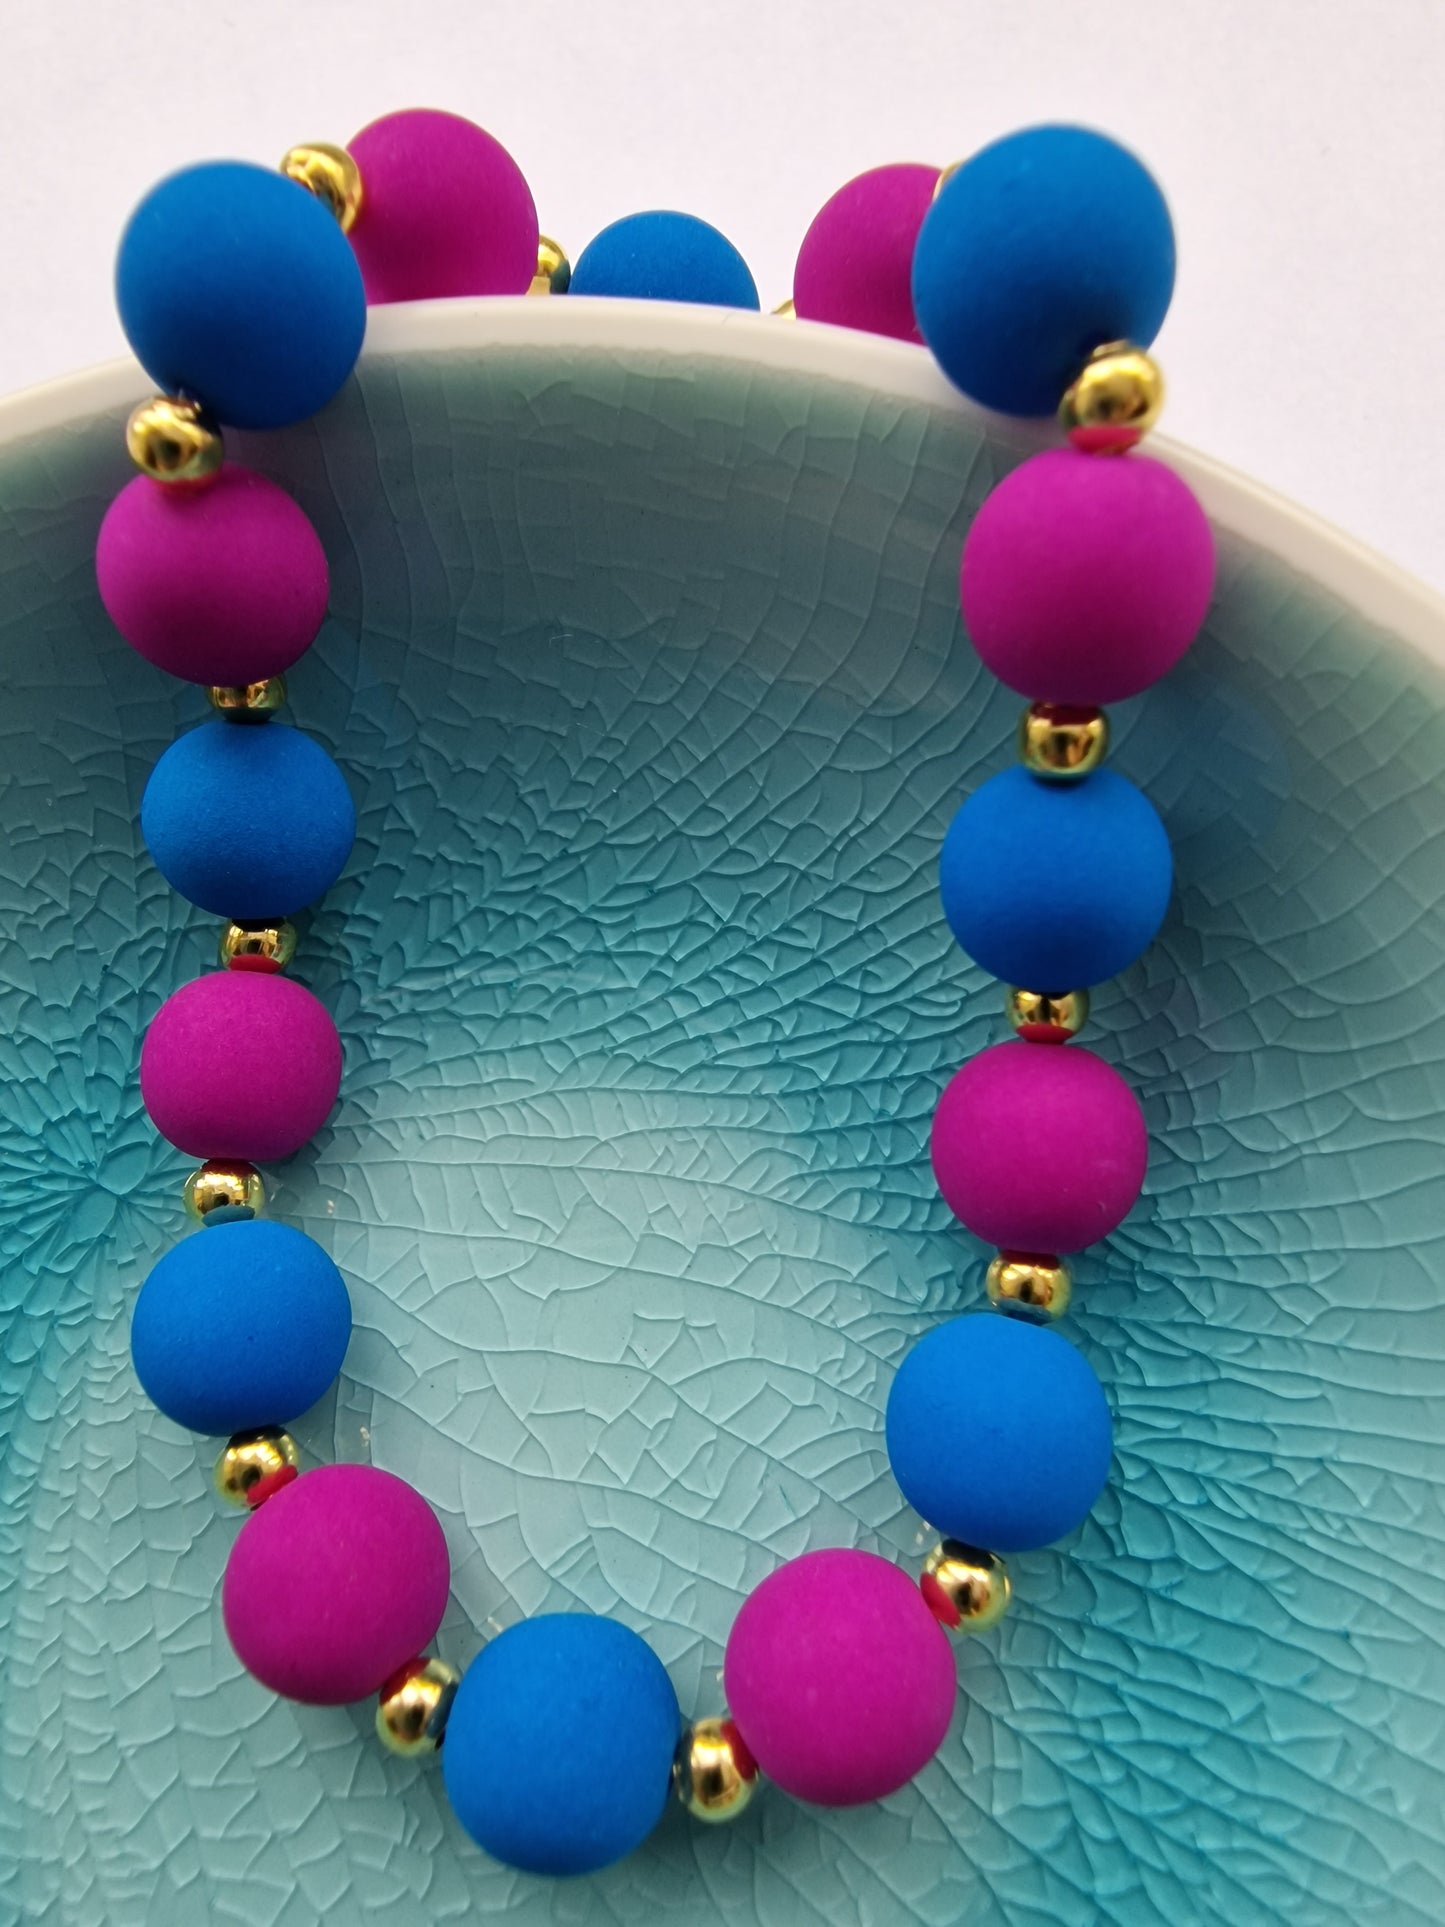 Colourful Neon Czech Glass Bead Bracelet in Blue and Orchid